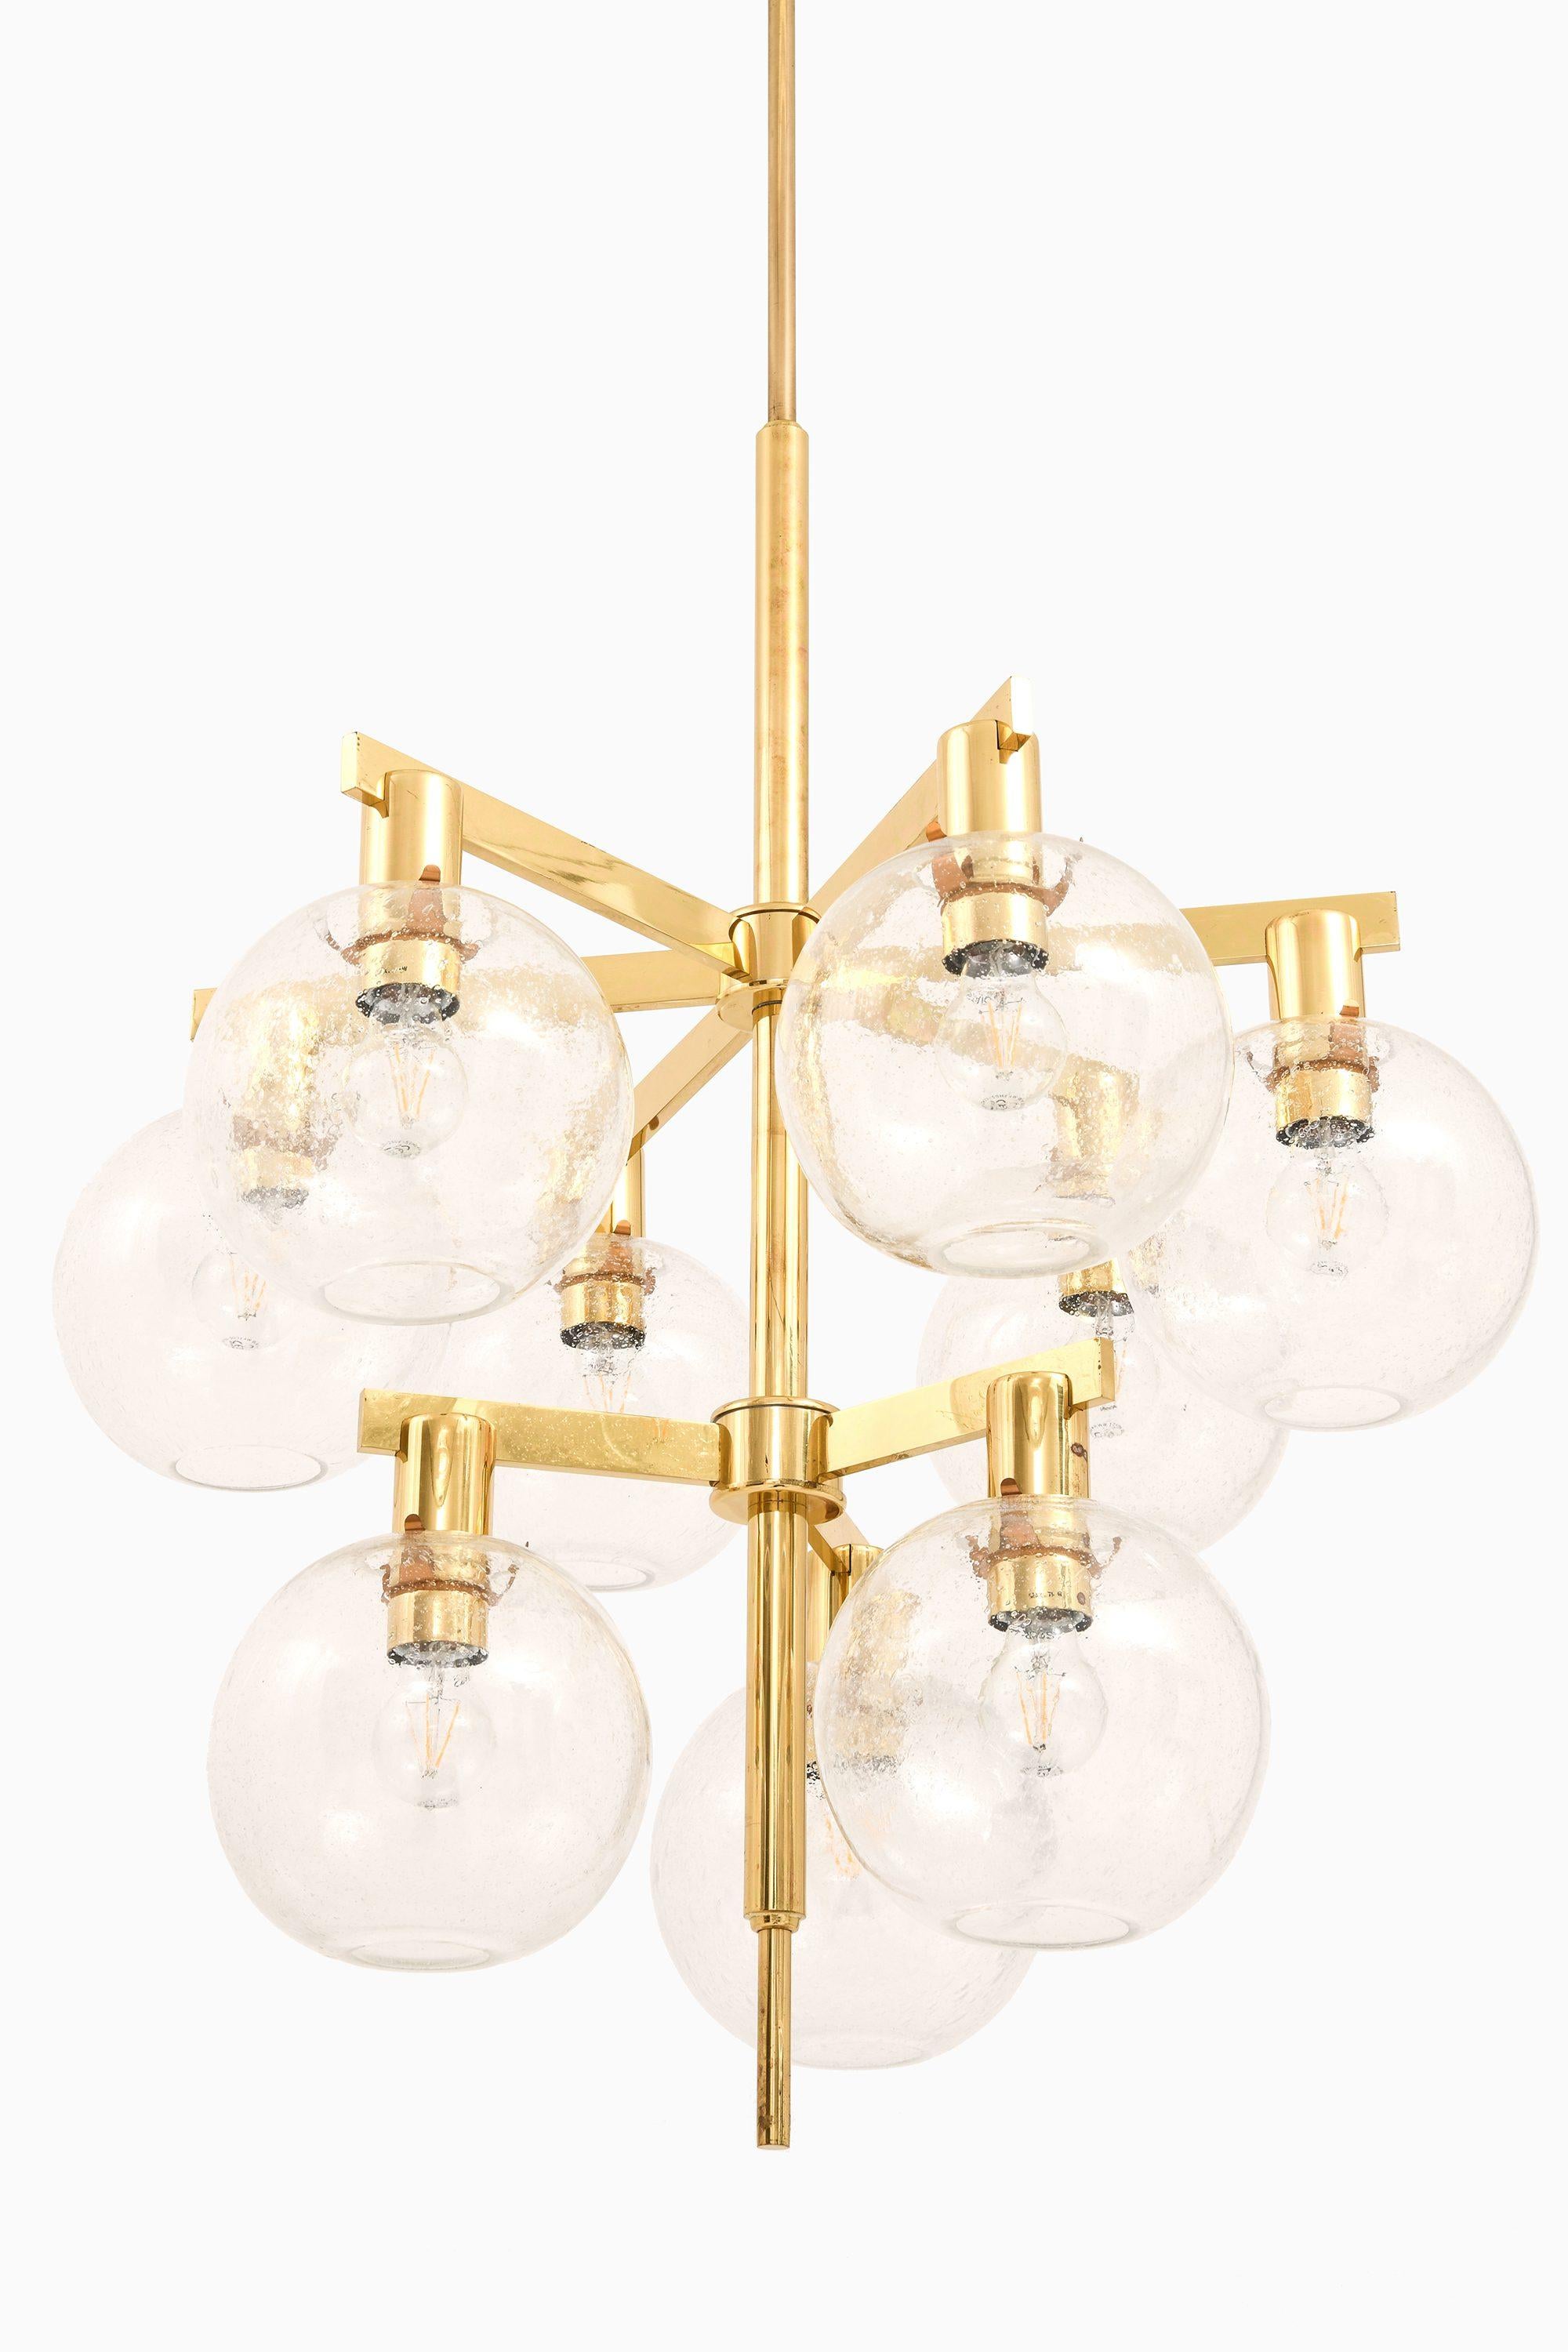 Scandinavian Modern Large Ceiling Lamp Chandelier in Brass and Glass by Hans-Agne Jakobsson, 1950's For Sale